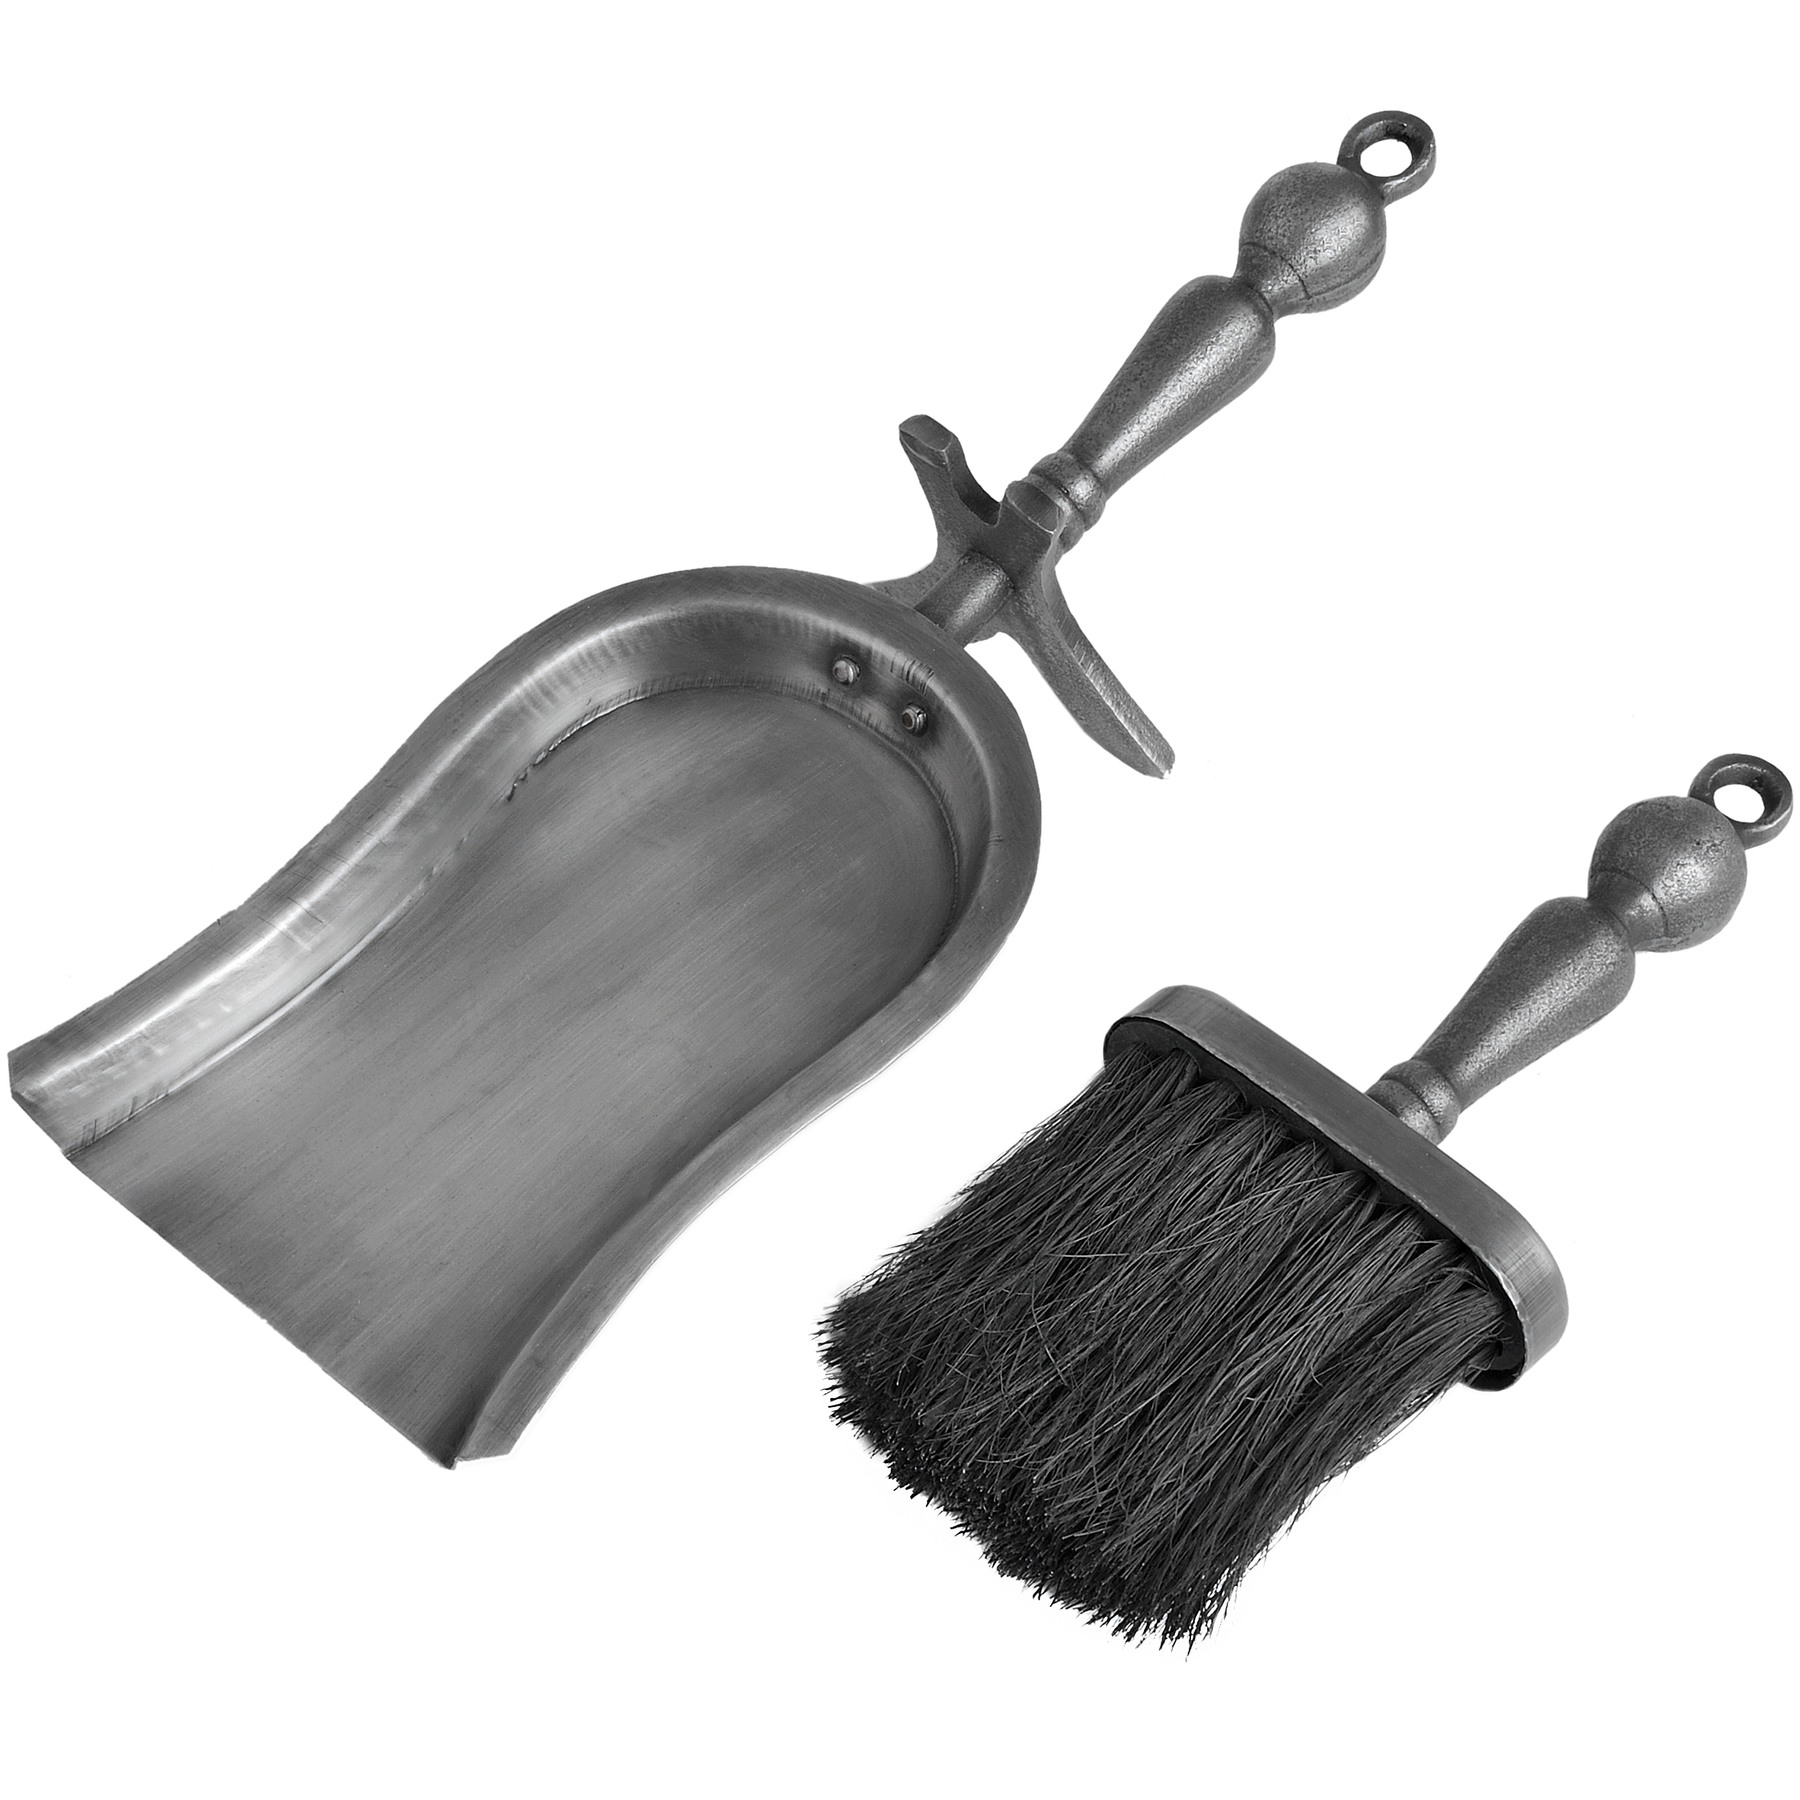 Hearth Tidy Set in Antique Pewter Effect Finish - Image 2